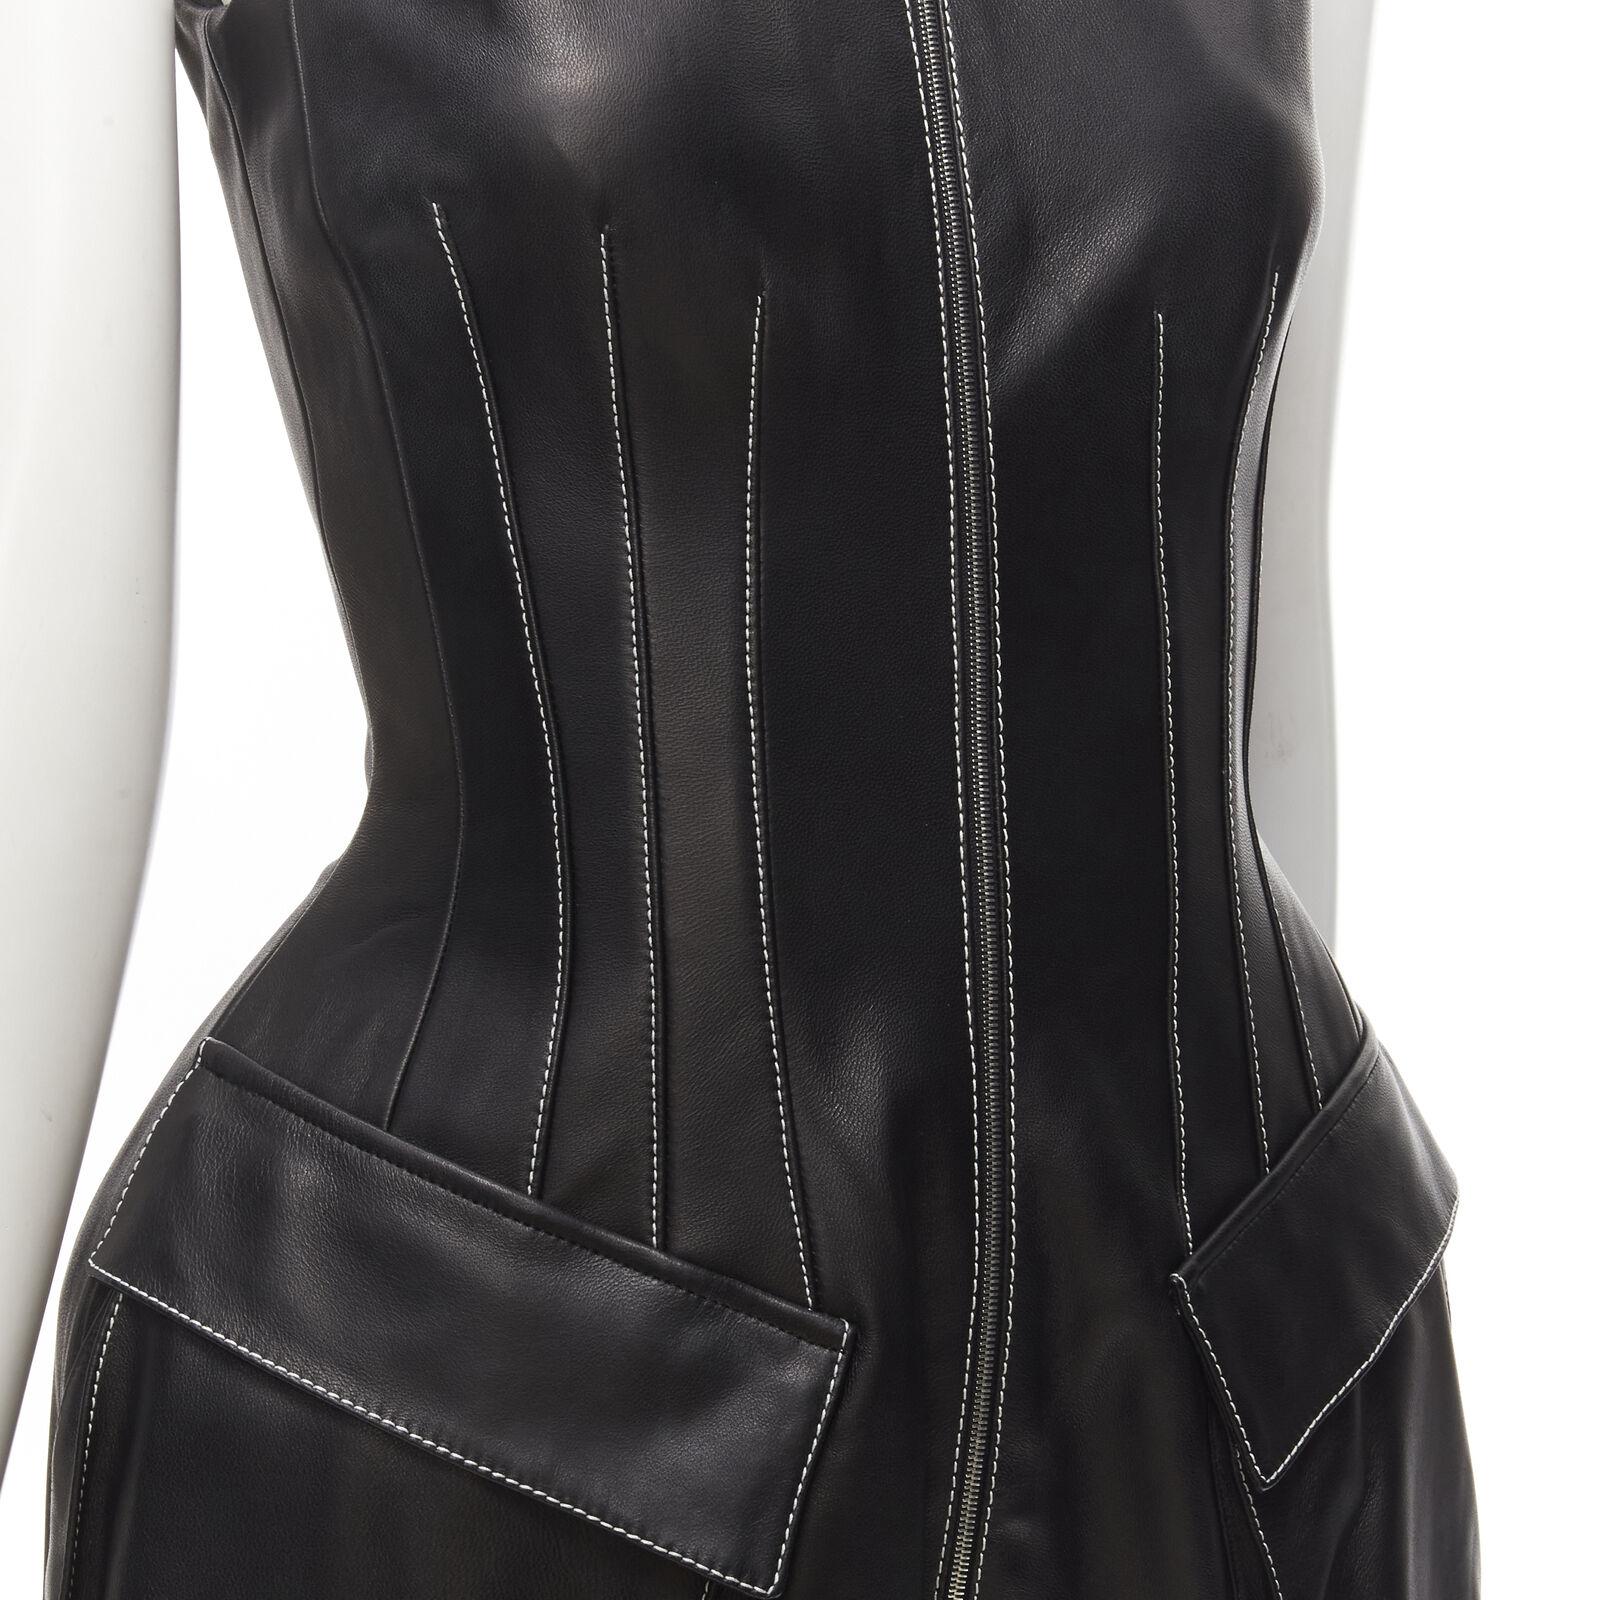 DAVID KOMA black lamb leather white overstitch padded hip dress UK6 XS
Reference: AAWC/A00180
Brand: David Koma
Material: Lambskin Leather
Color: Black, White
Pattern: Solid
Closure: Zip
Lining: Fully Lined
Extra Details: Black s upple soft lambskin